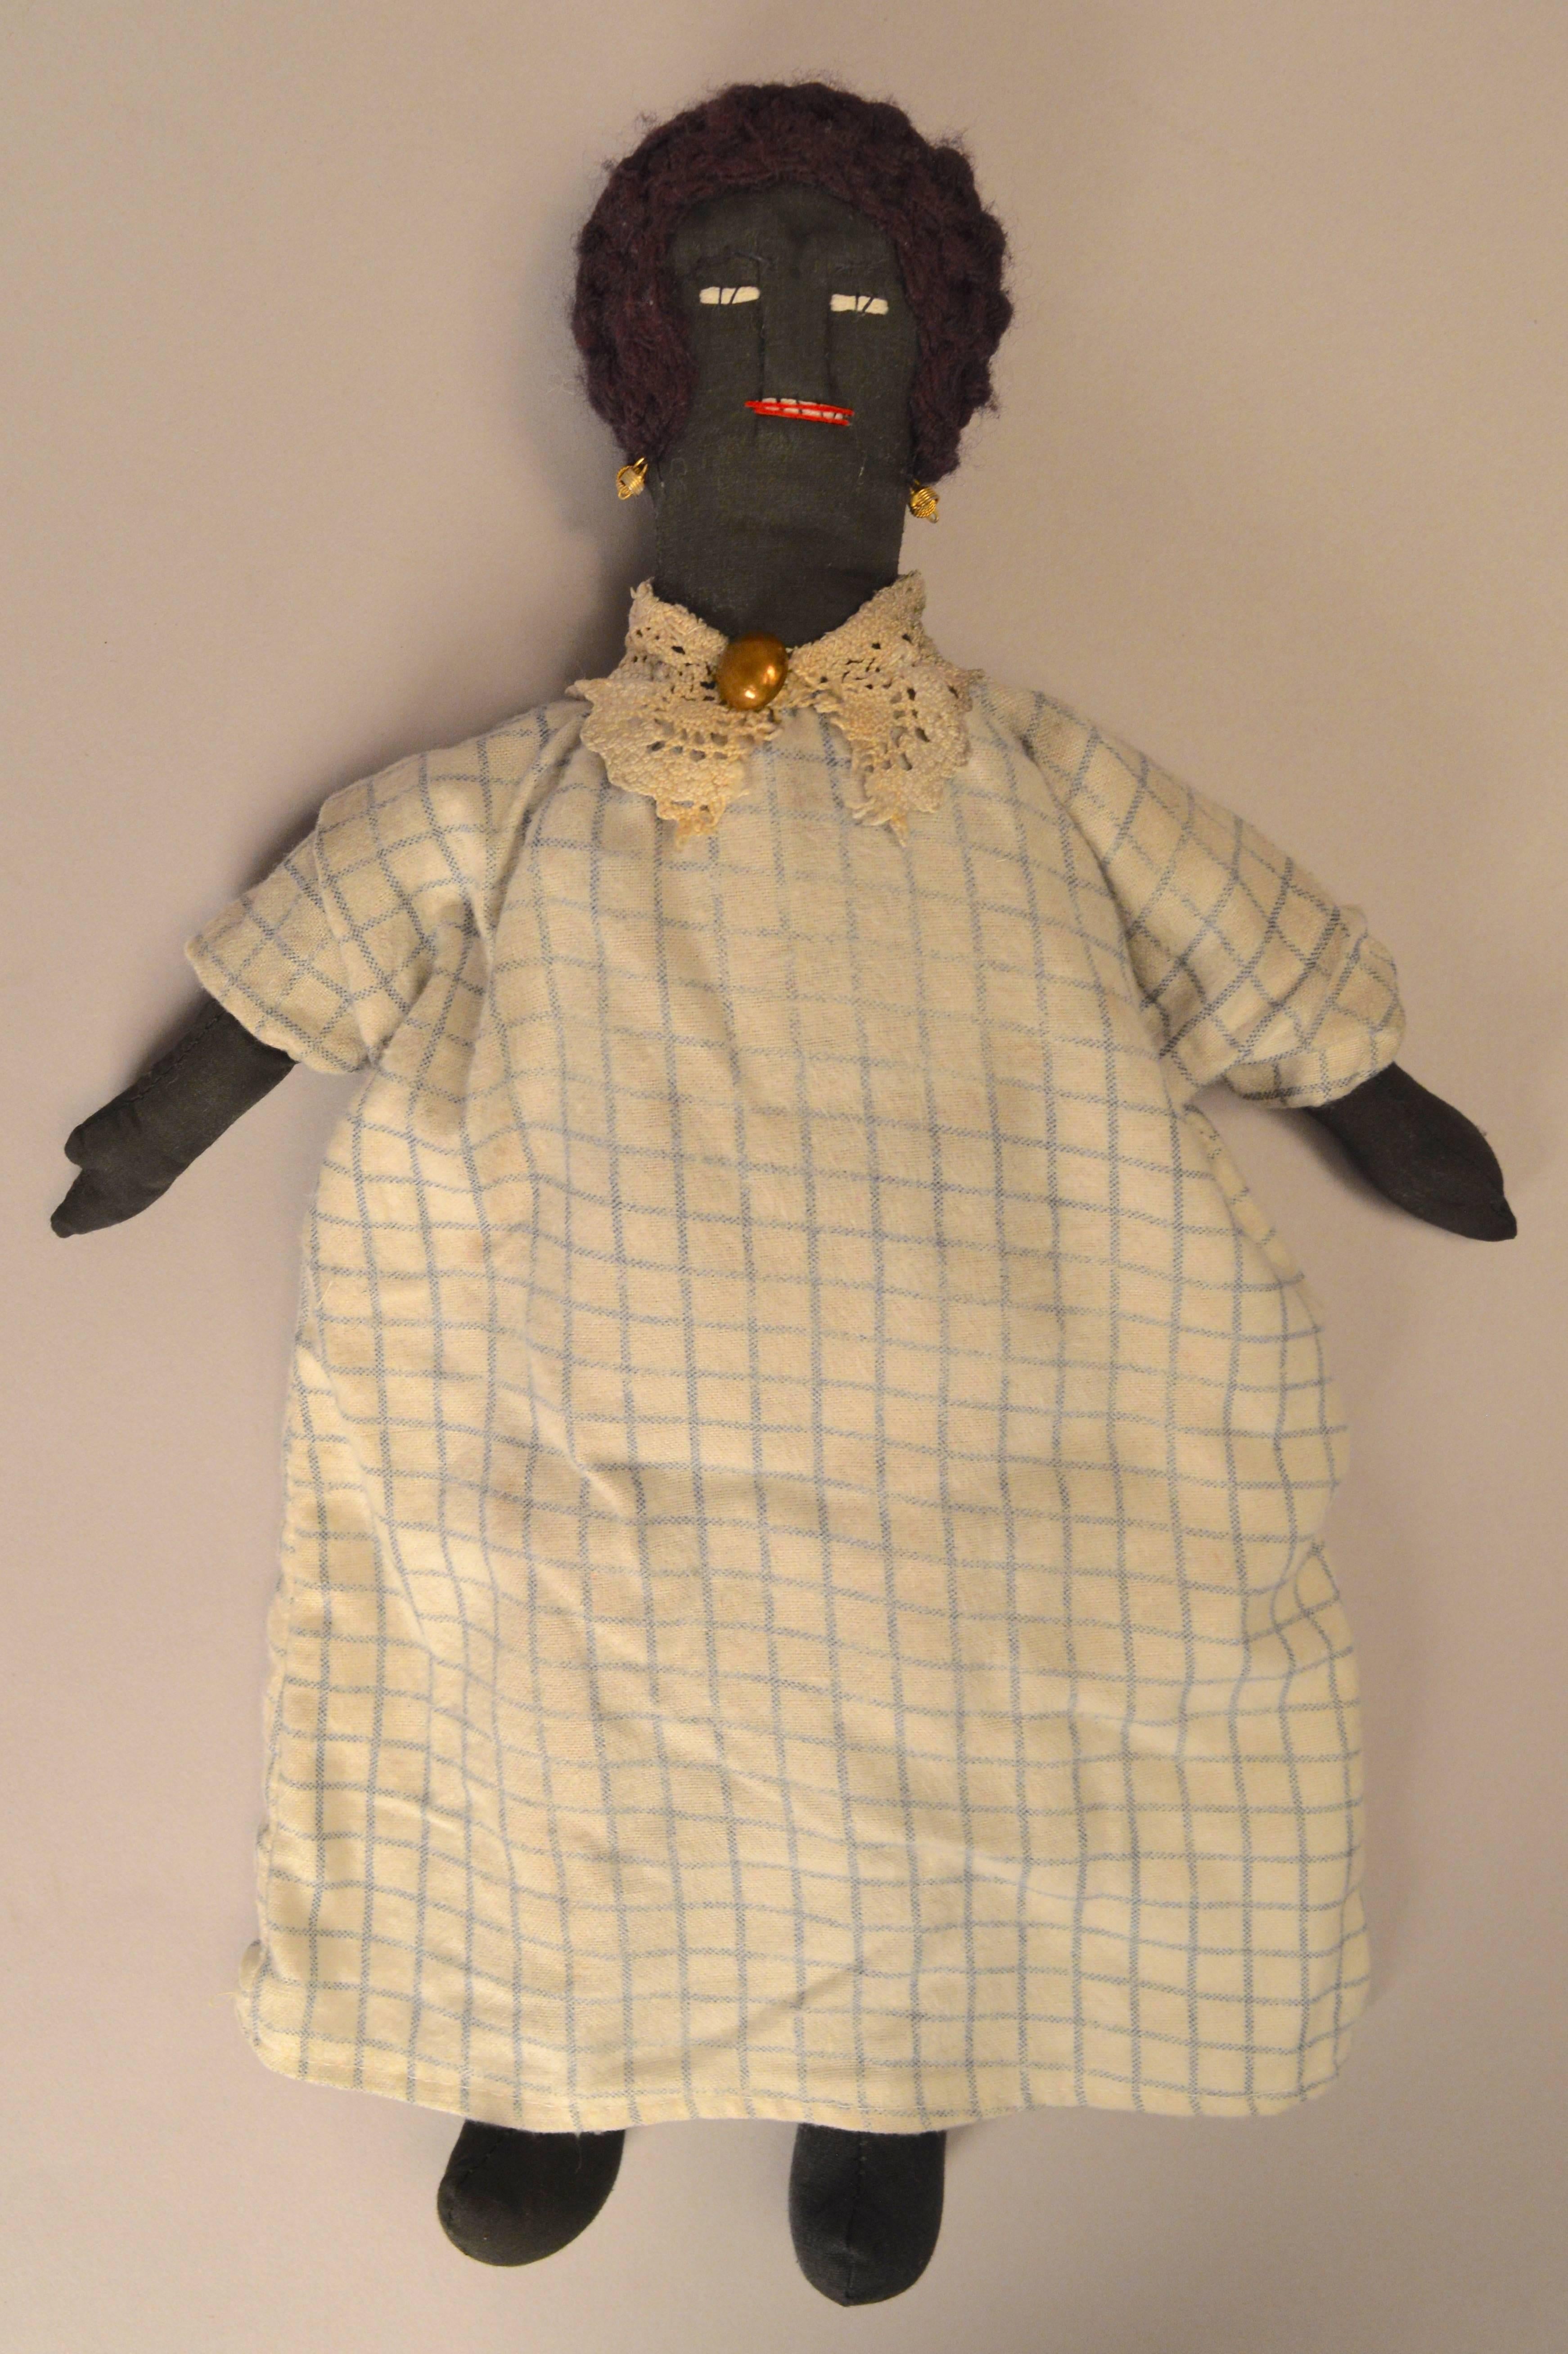 Rare American southern hand made black cloth doll. Crochet afro style hair, embroidered facial features and small knot golden metal earrings.
Her dress is cotton flannel with a hand crochet collar .
